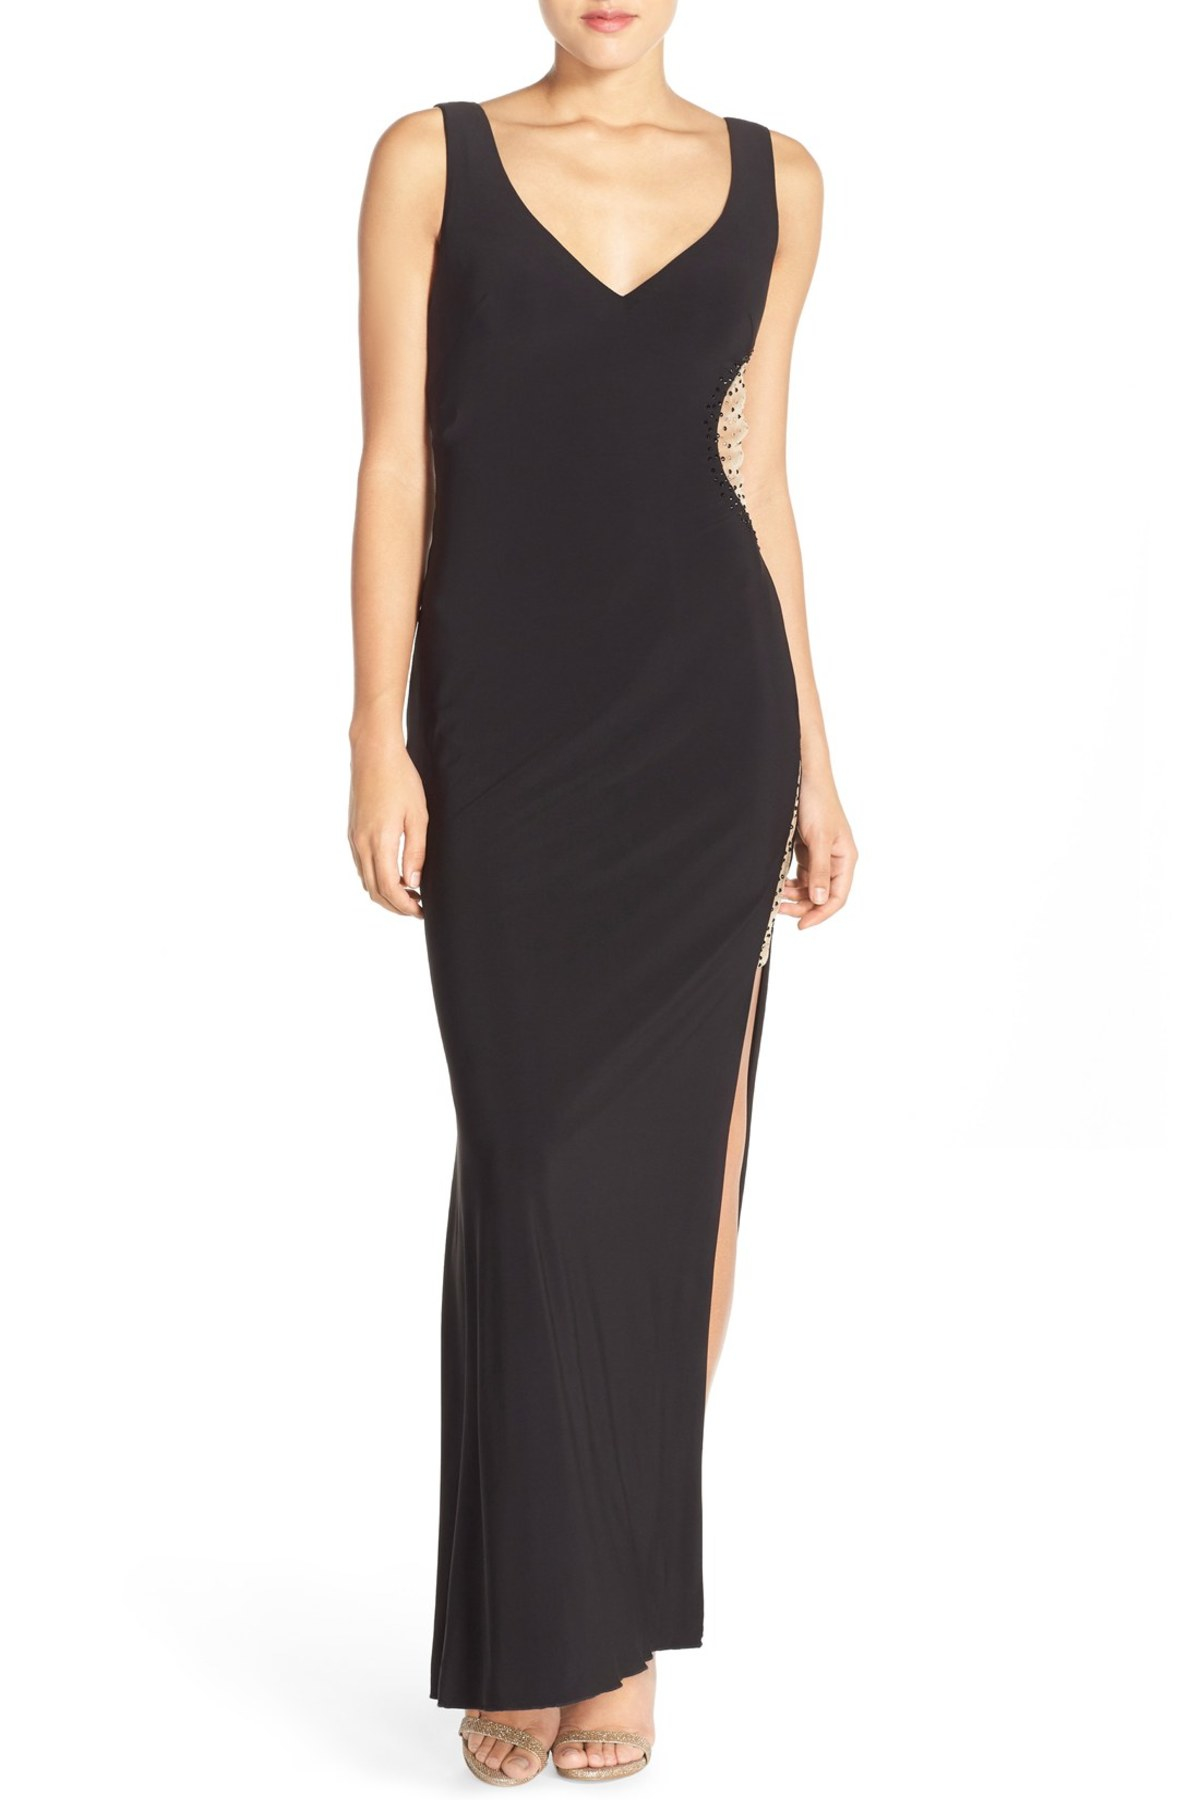 Lyst - Js Collections Embellished Illusion Back Jersey Gown in Black